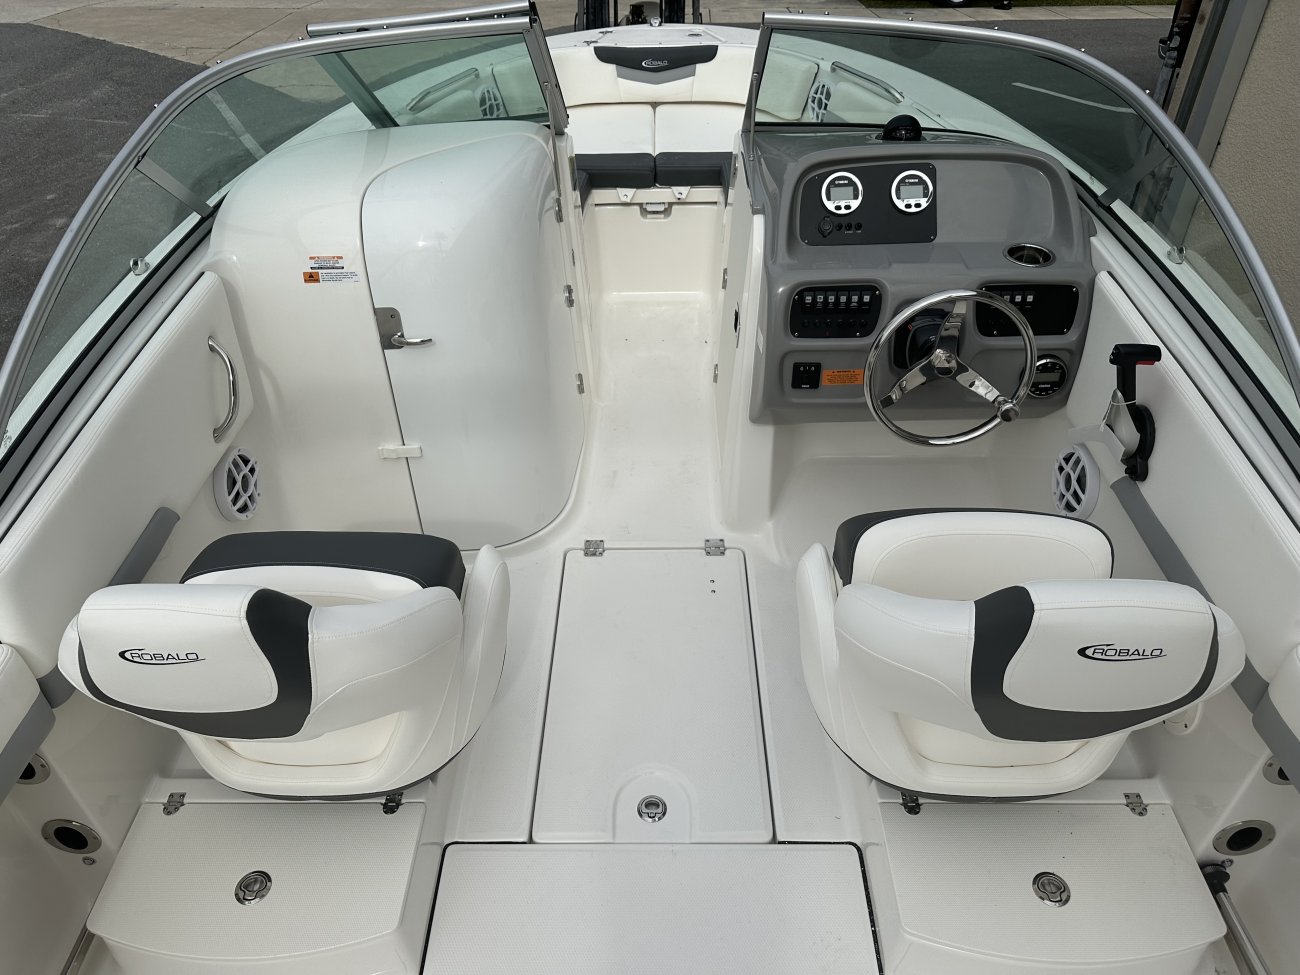 A R207 Dual Console is a Power and could be classed as a Dual Console, Fish and Ski, Freshwater Fishing, High Performance, Saltwater Fishing, Runabout,  or, just an overall Great Boat!